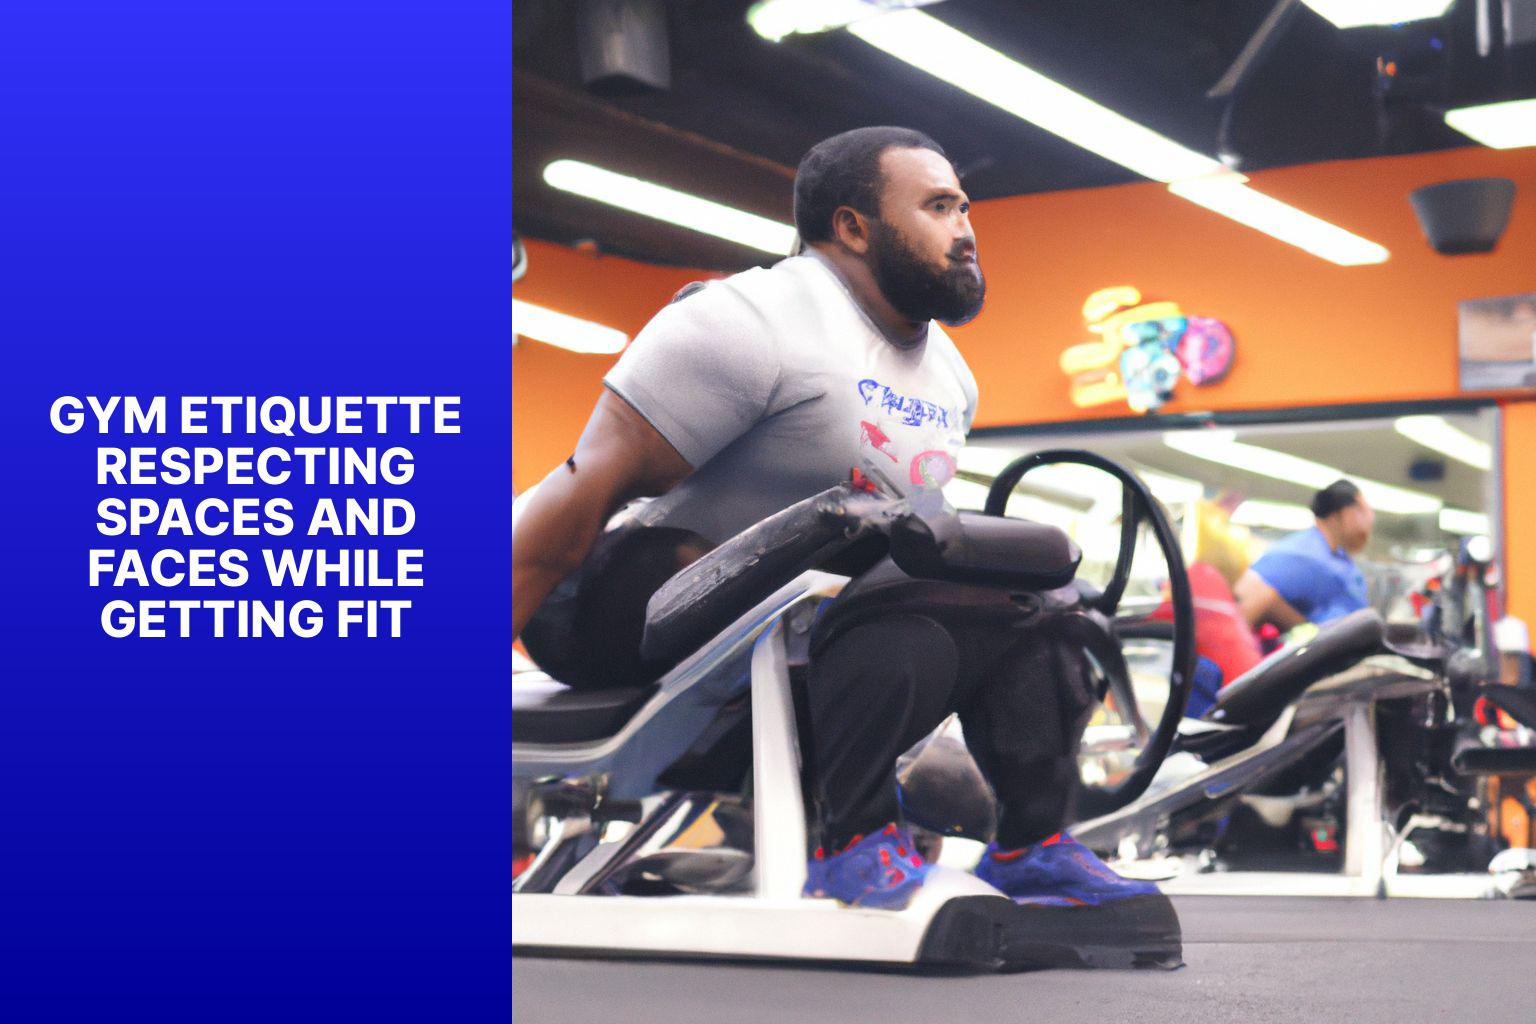 Gym Etiquette: Respecting Spaces and Faces while Getting Fit